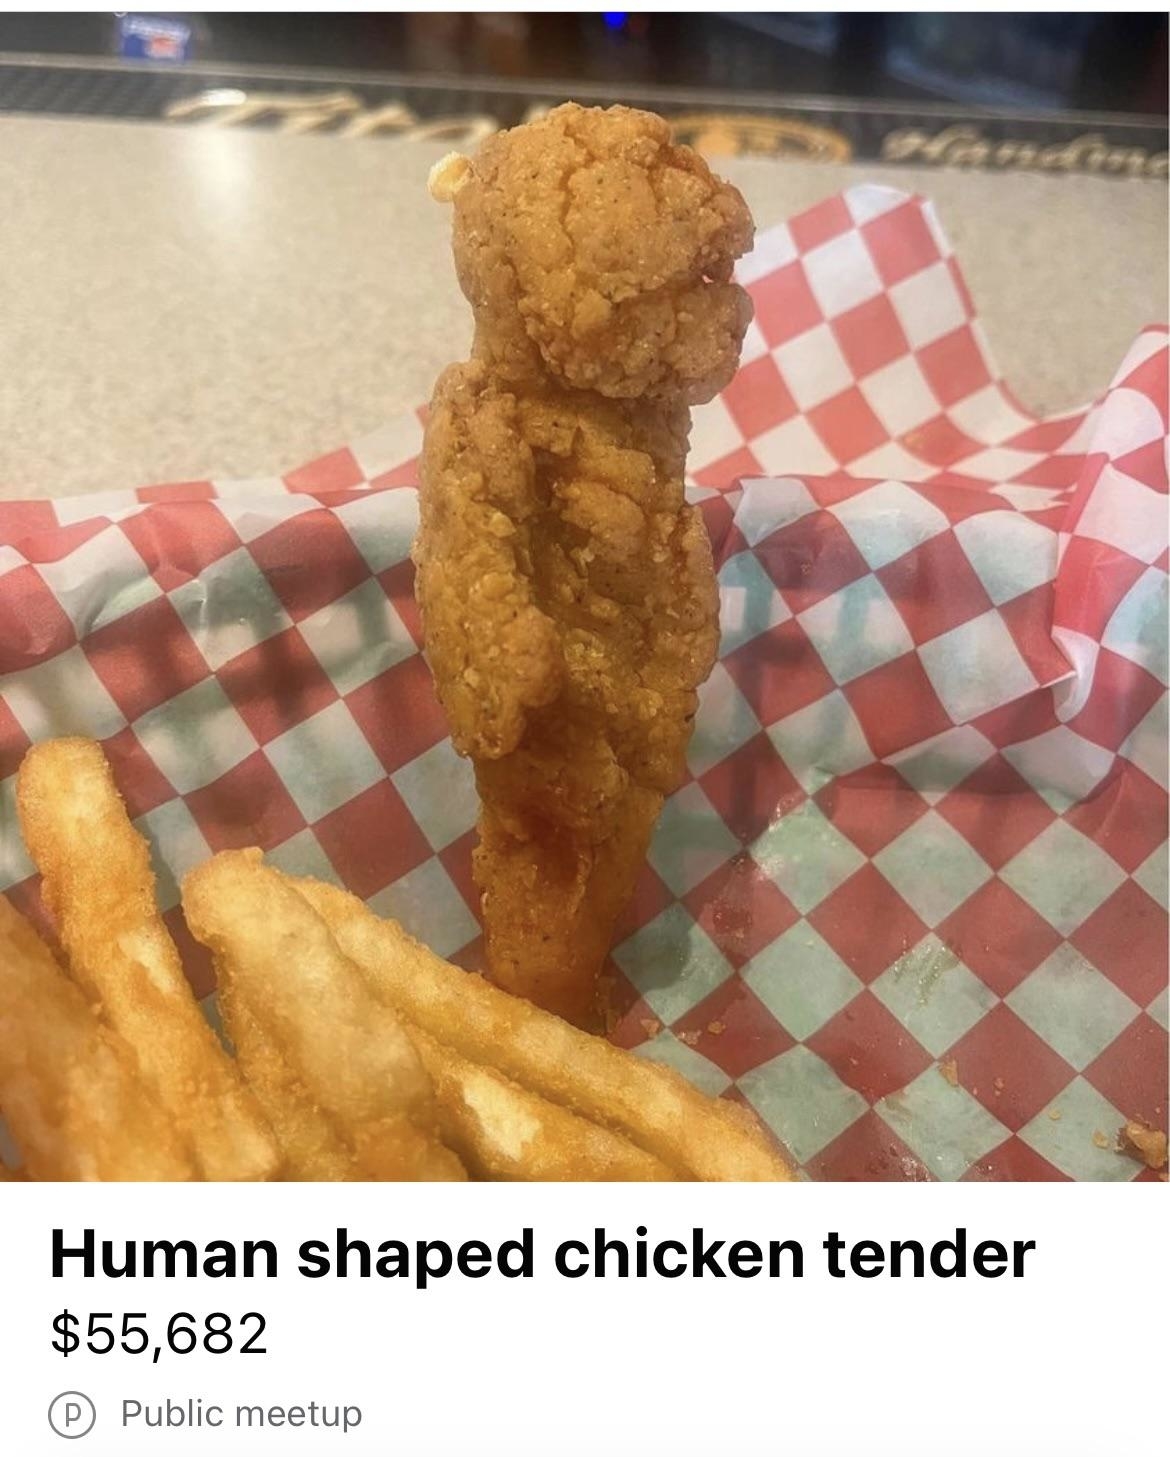 Chicken tender resembling a human figure next to fries on checkered paper, for $55,682